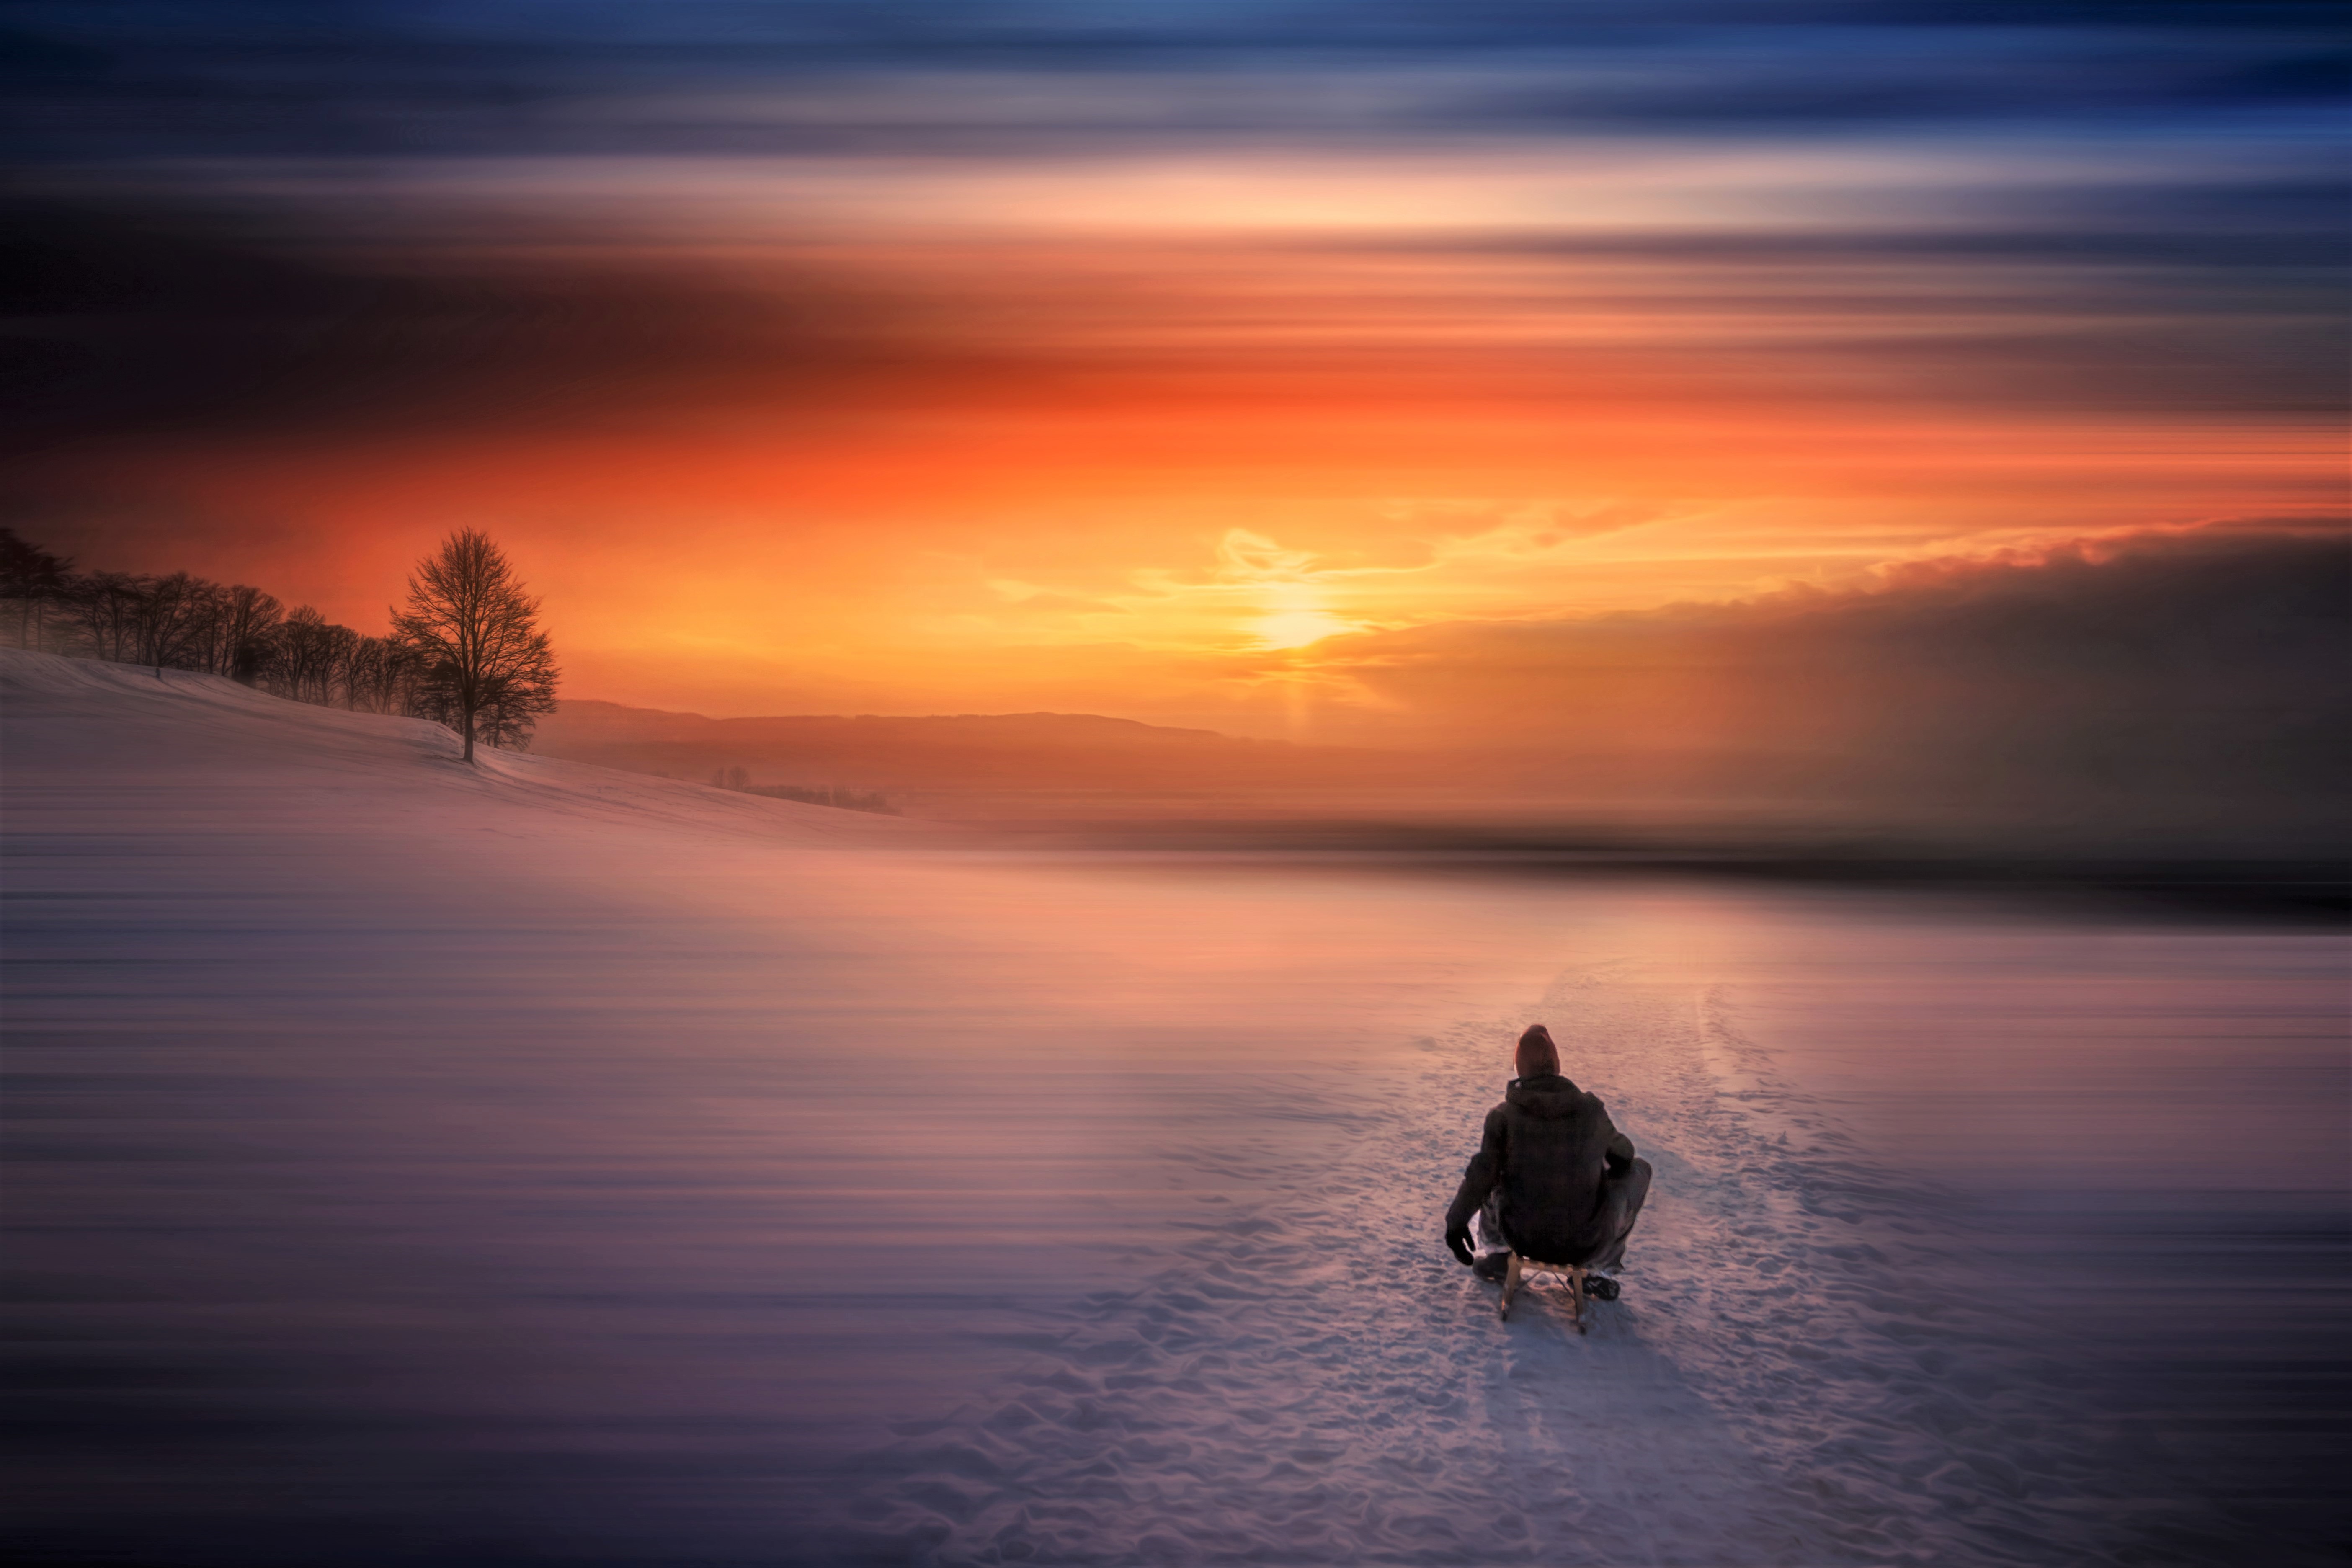 photography, winter, lake, sky, sled, snow, sunset High Definition image